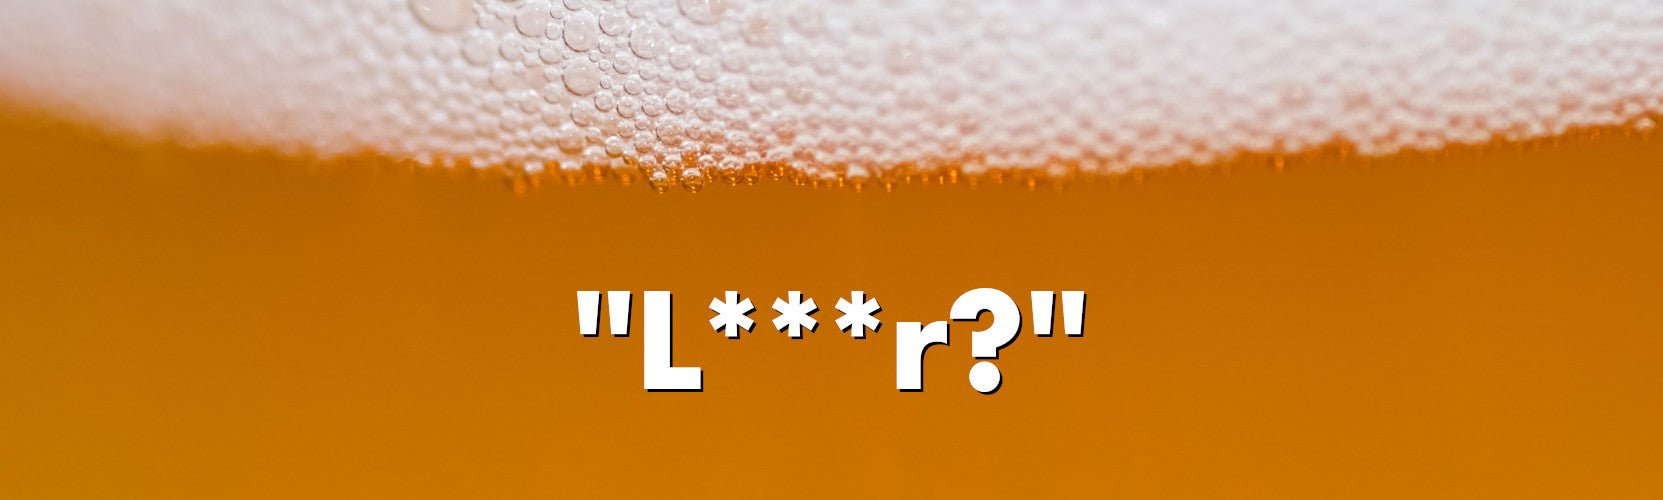 Why ‘Lager’ Isn’t a Four Letter Word - Germandrinks.co.uk